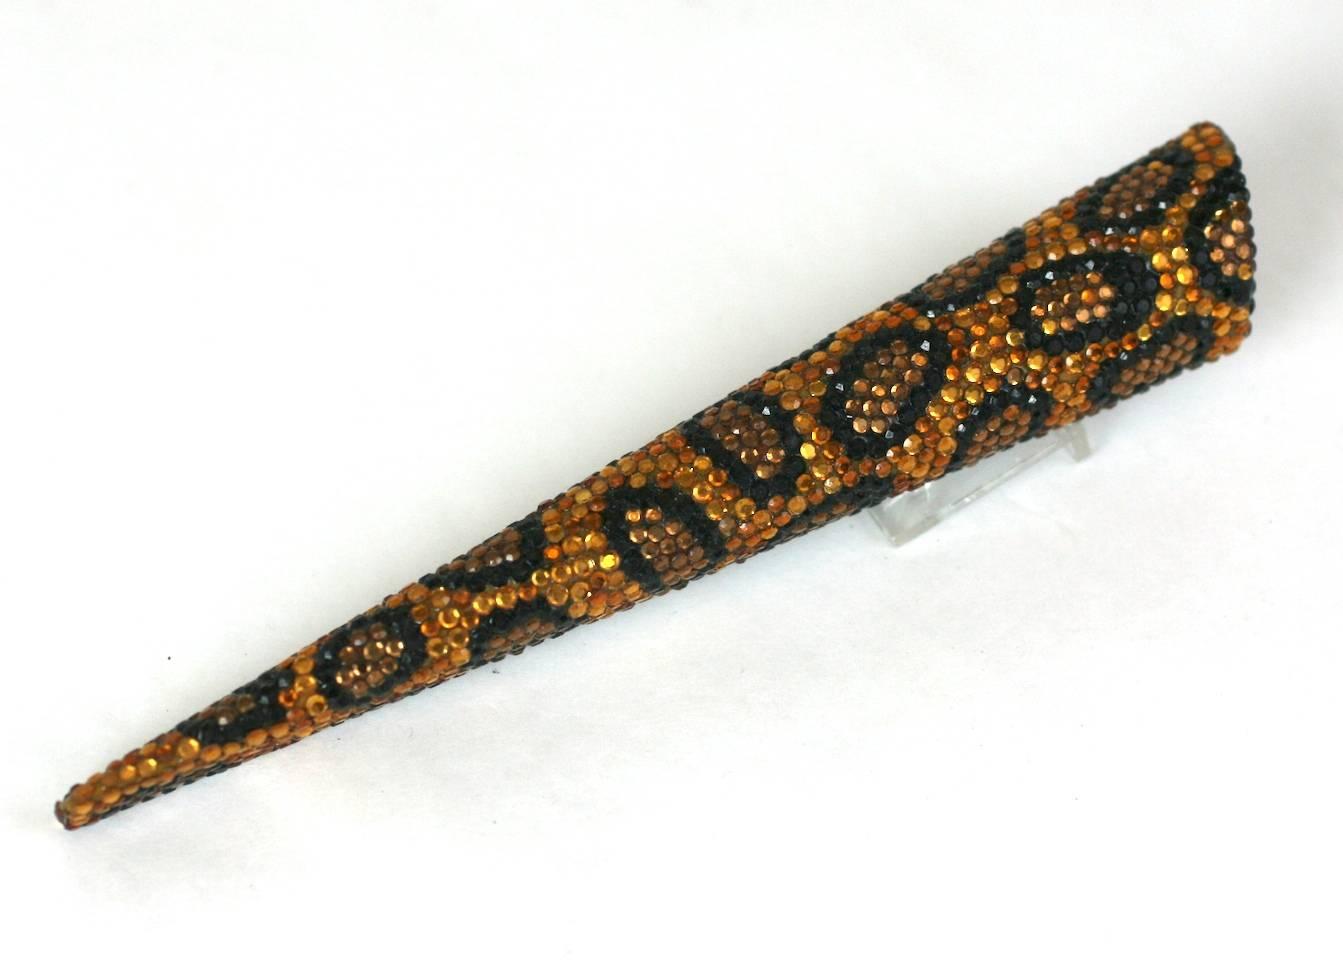 Large Leopard Pave Brooch from the 1980's. Hand applied crystals form the ornate animal pattern.
1980's USA.
Excellent quality.
5